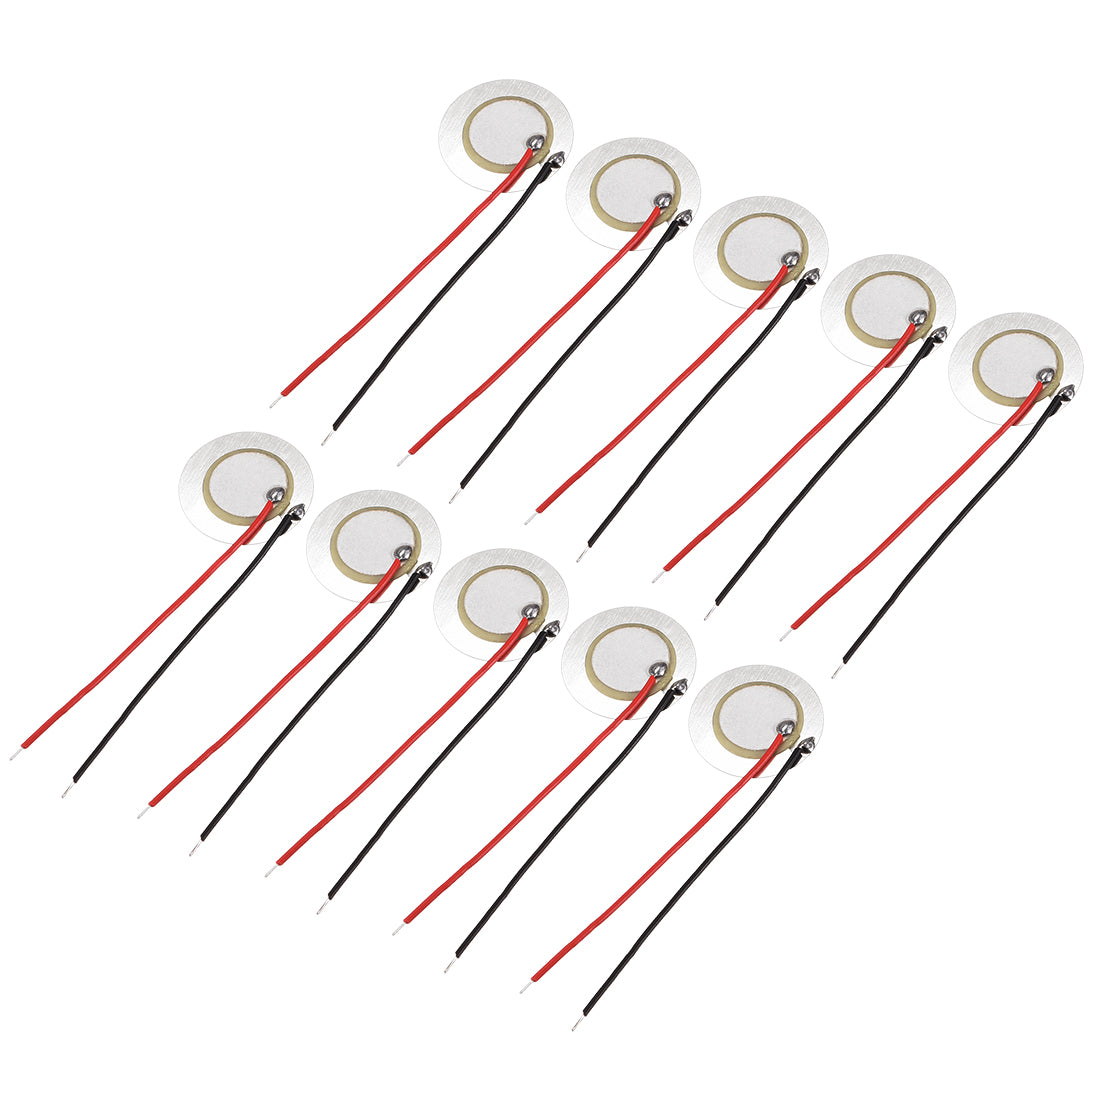 uxcell Uxcell 10 Pcs Piezo Discs 20mm Acoustic Pickup Transducer Prewired Microphone Trigger Drum CBG Guitar